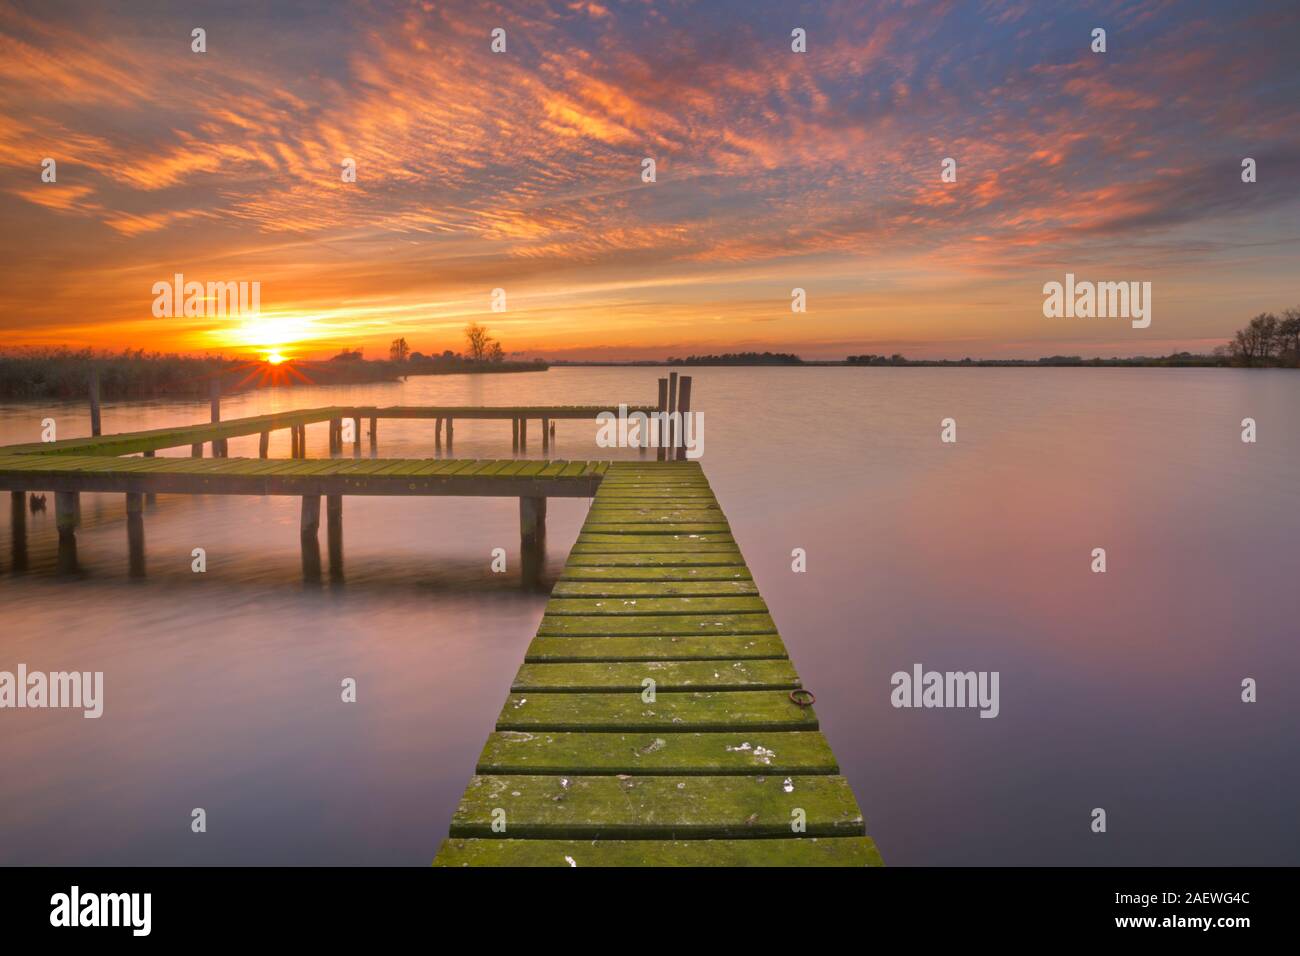 An old jetty on a lake in The Netherlands, photographed at sunset. Stock Photo